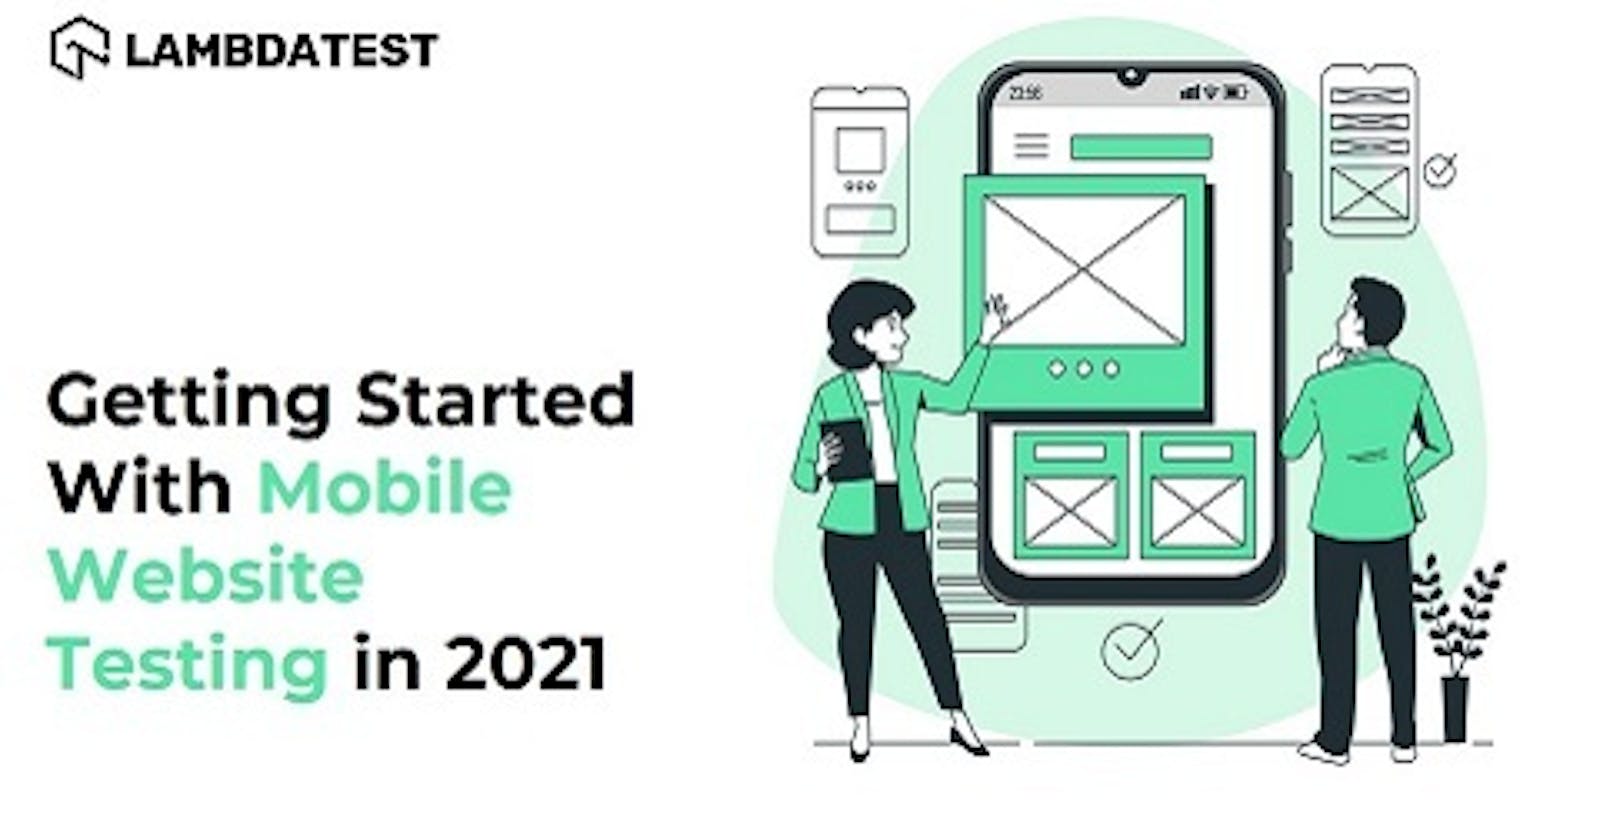 How To Get Started With Mobile Website Testing In 2021?